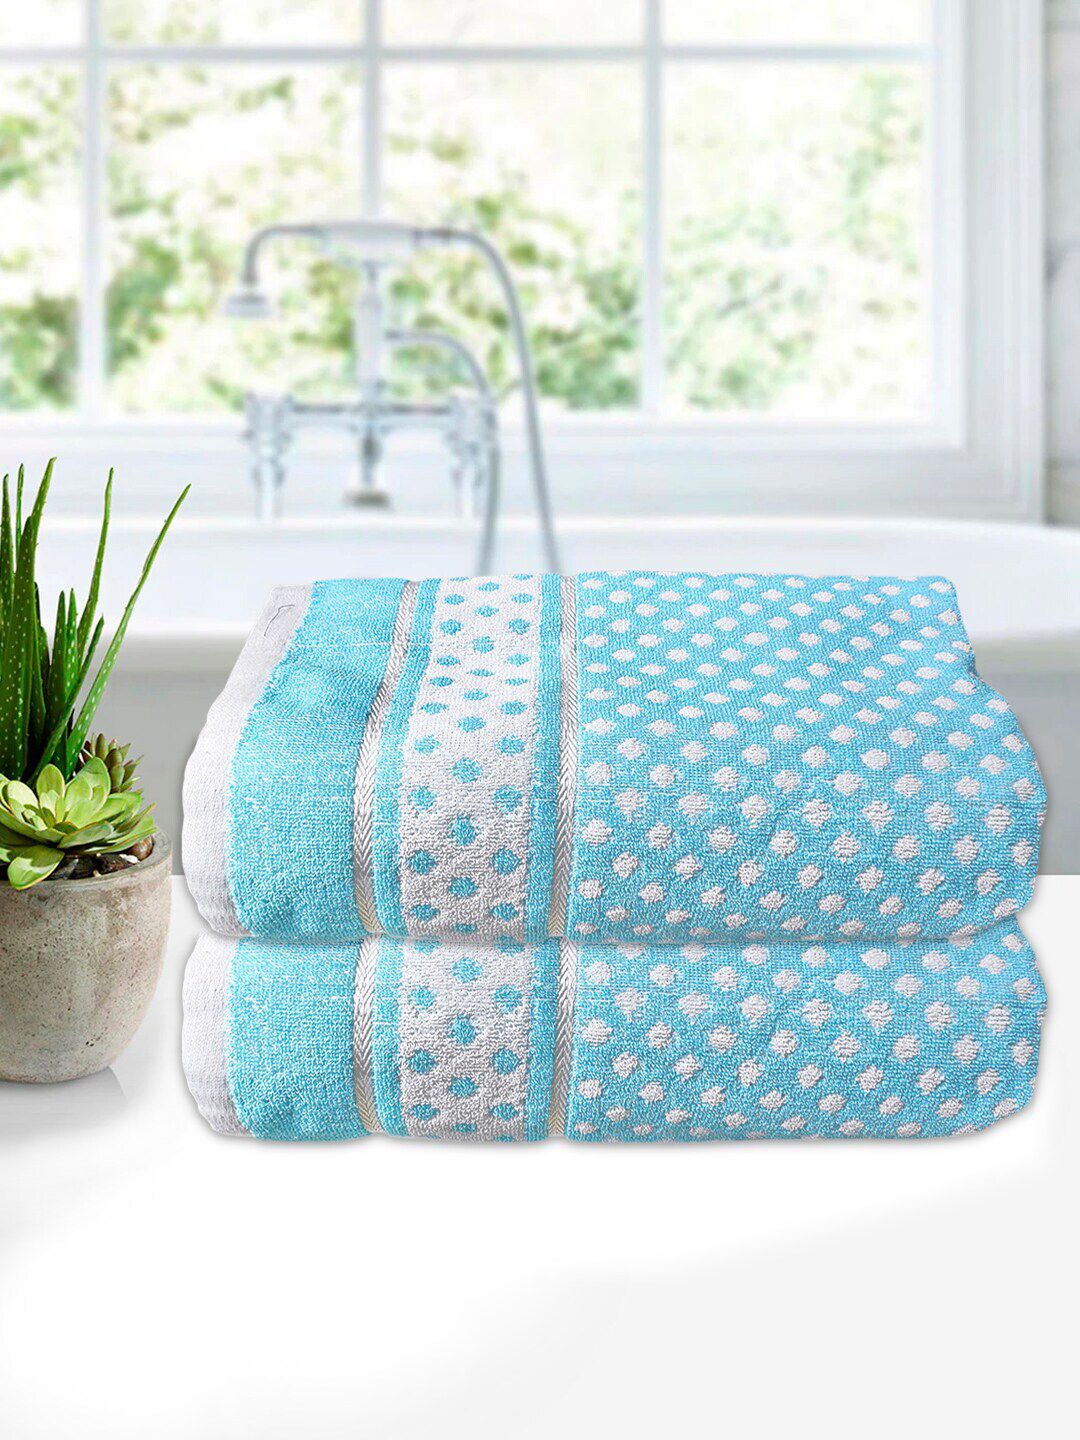 Kuber Industries Unisex Set Of 2 Blue & White Printed 400 GSM Soft Cotton Bath Towels Price in India